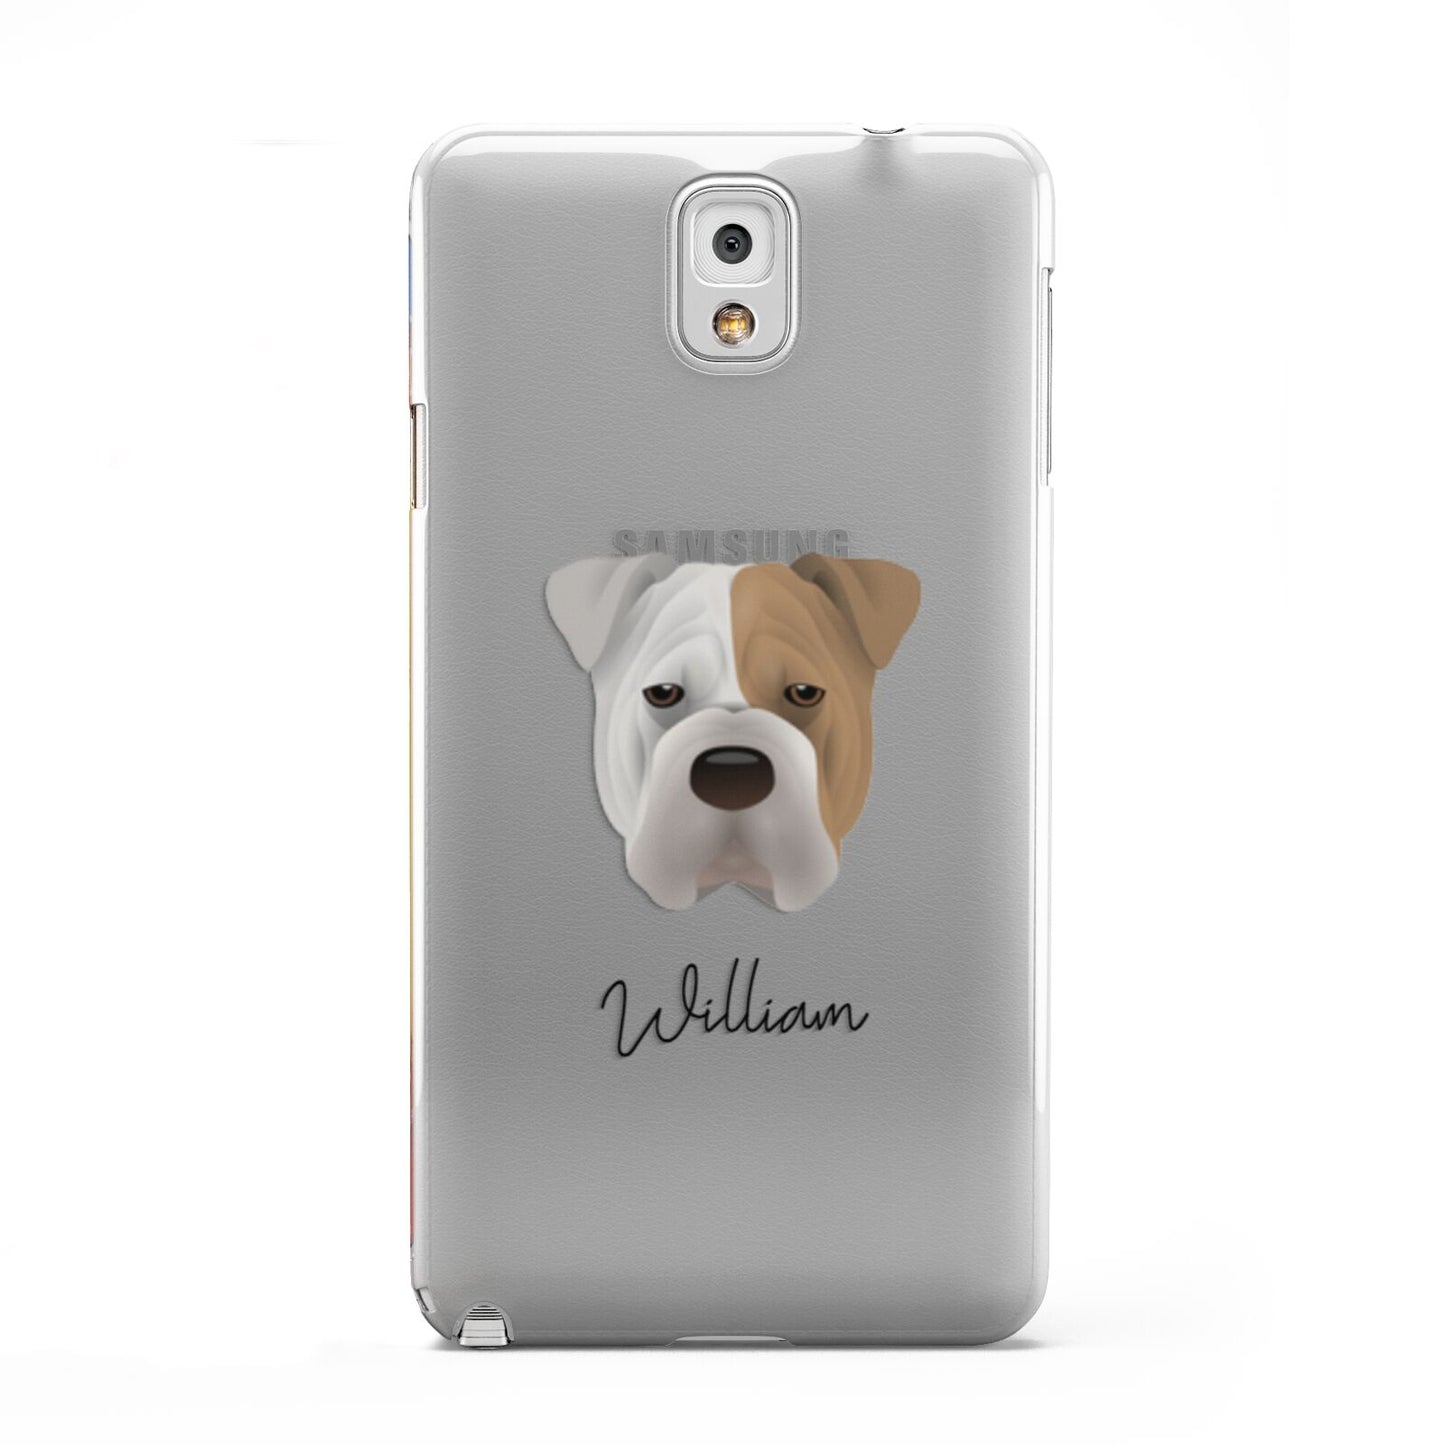 Bull Pei Personalised Samsung Galaxy Note 3 Case